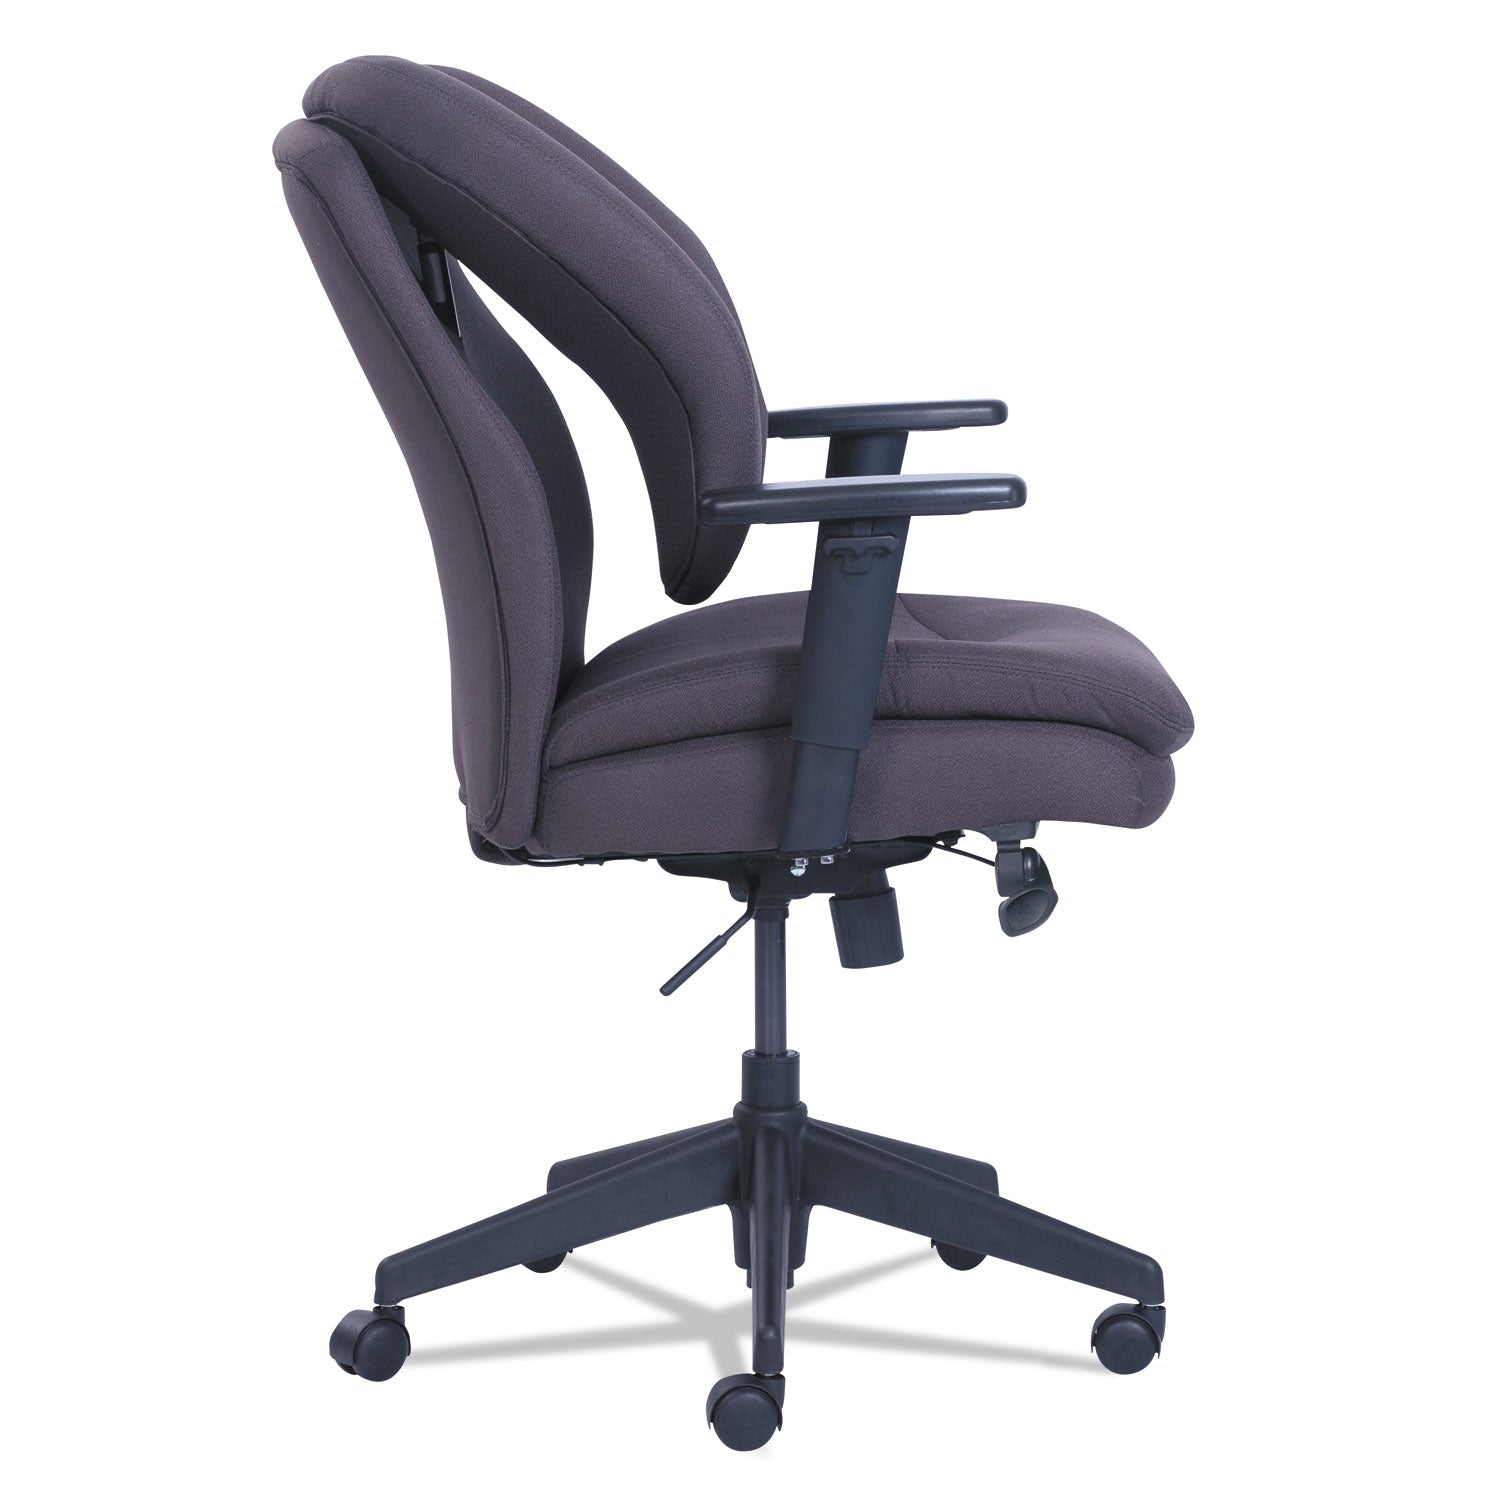 cosset-ergonomic-task-chair-supports-up-to-275-lb-195-to-225-seat-height-gray-seat-back-black-base_srj48967b - 3